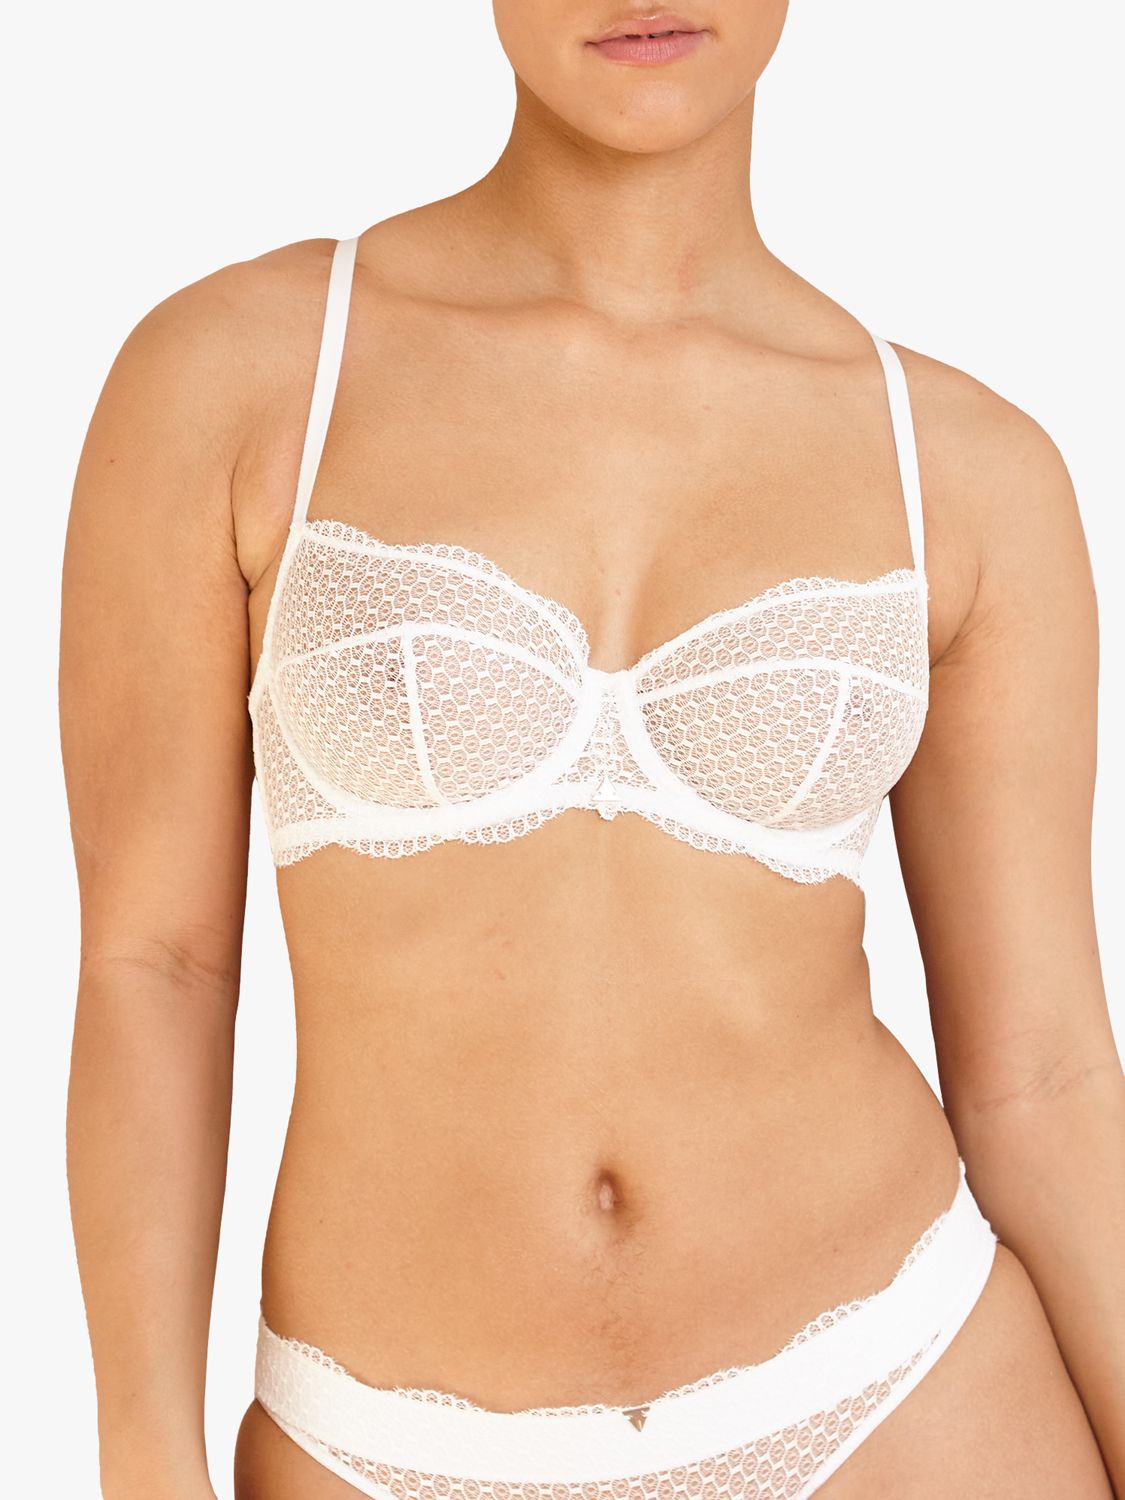 Beija London Stripes Y Non Padded Underwired Bra, B-D Cup Sizes, £65.00